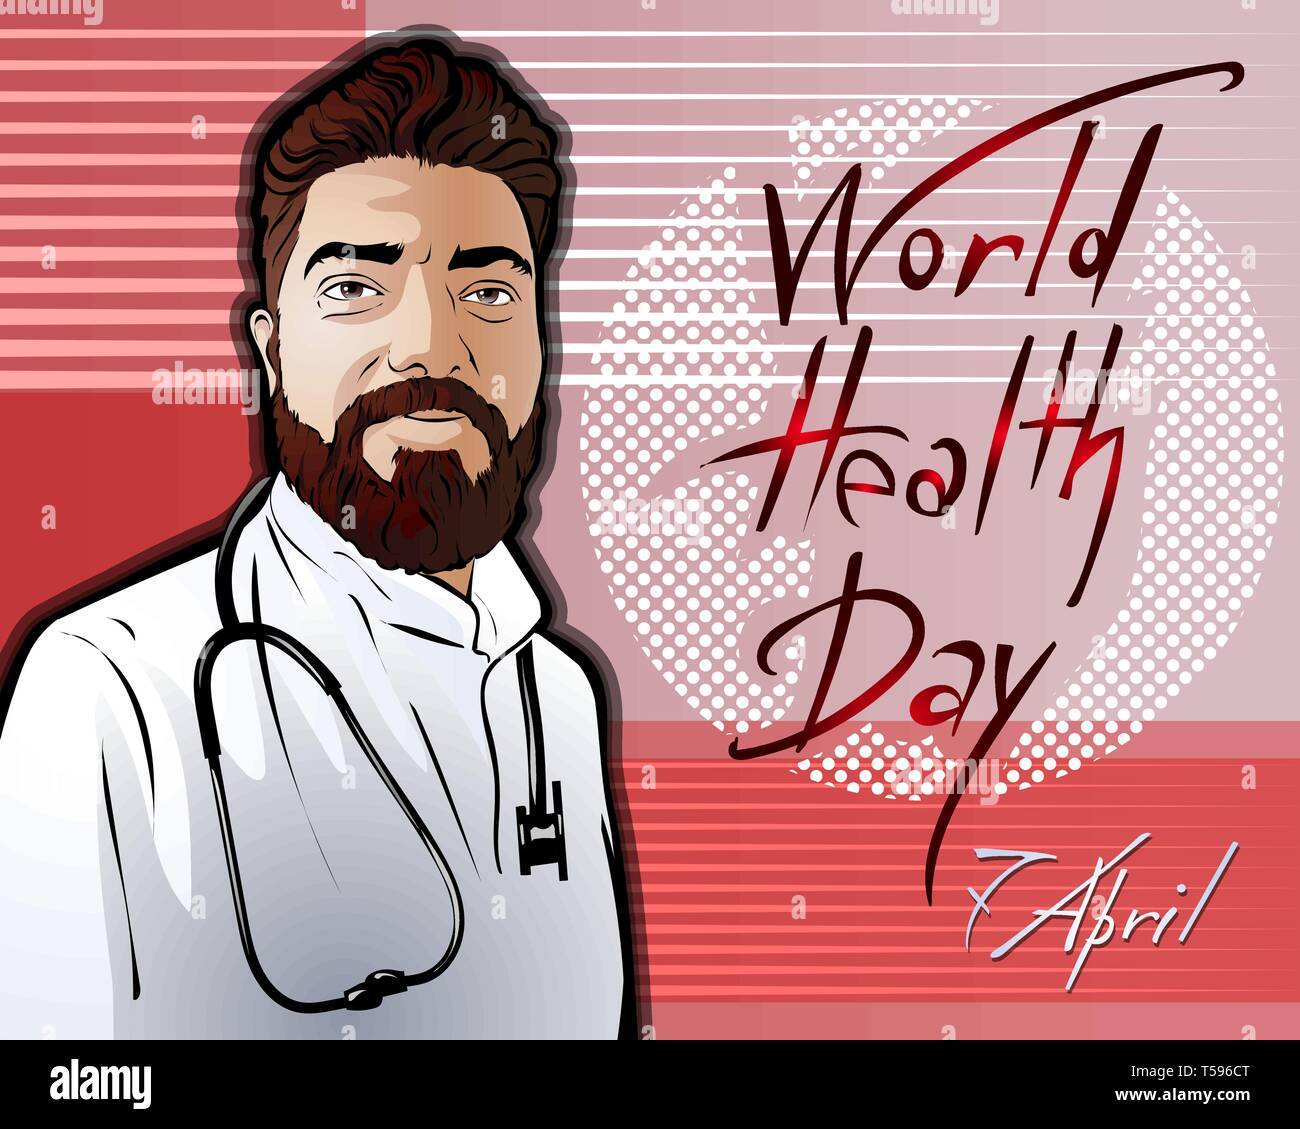 Vector illustration dedicated to the World Health Day on April 7th. A smiling middle-aged man in a white coat with a stethoscope. Beautiful handwritte Stock Vector